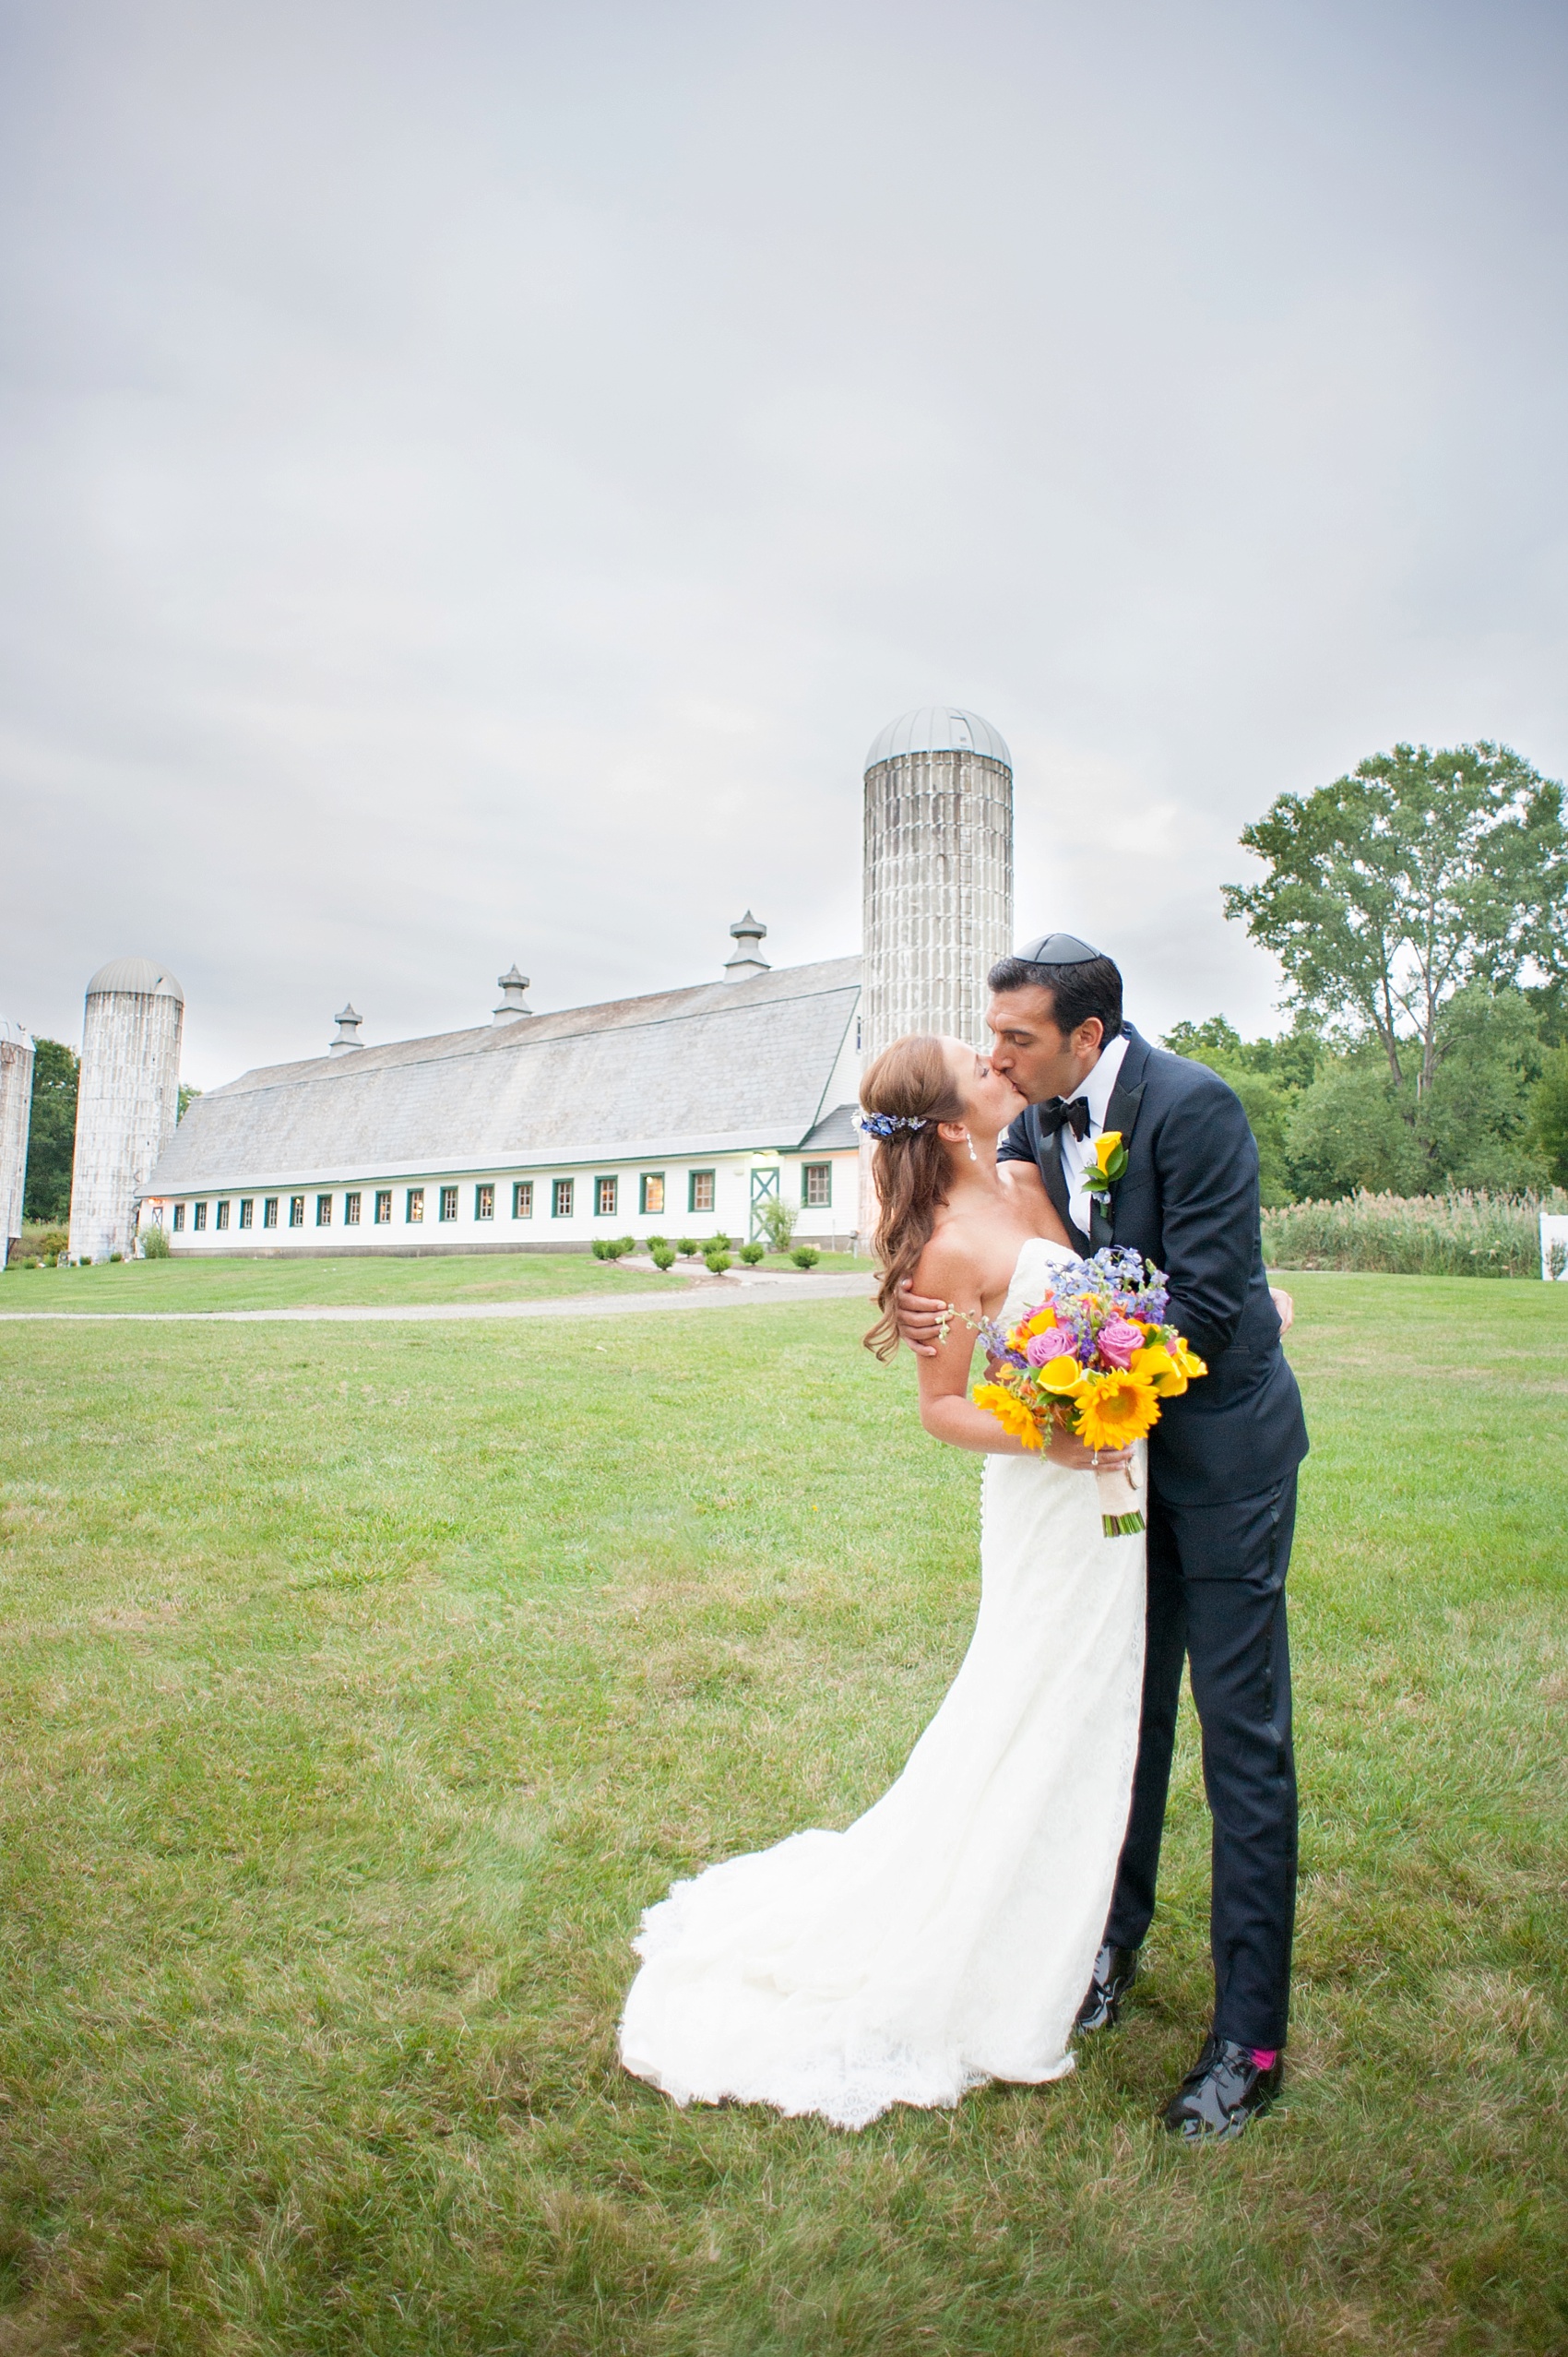 Perona Farms wedding photos barn bride groom photos for a colorful rustic summer celebration. Pictures by New Jersey photographer Mikkel Paige Photography.